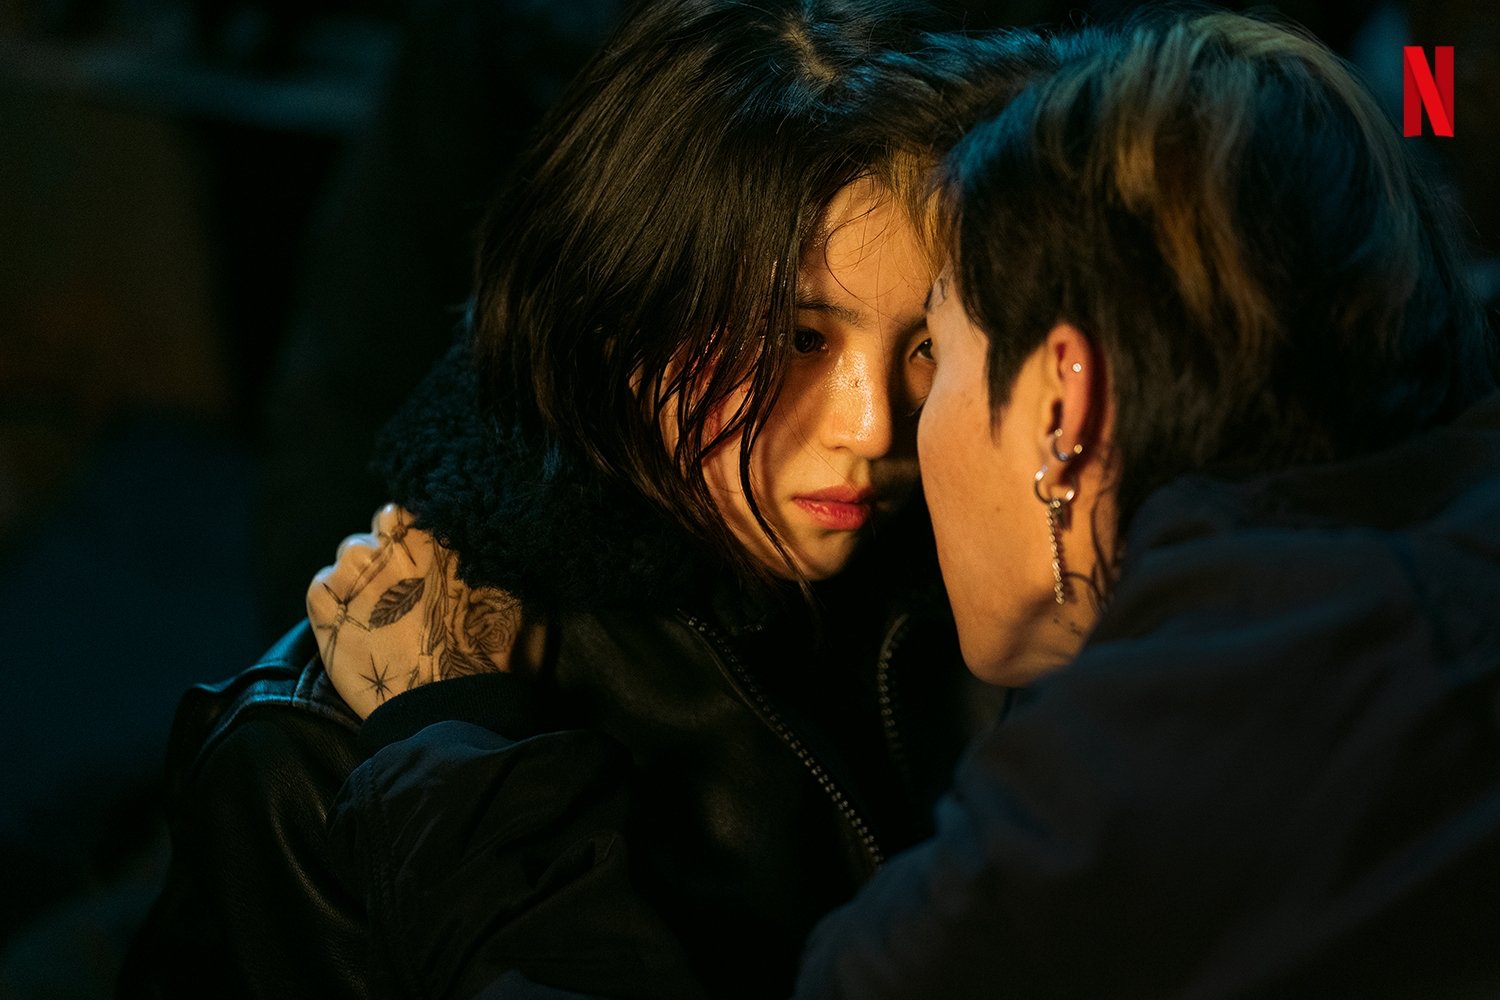 Actor Han So-Hee as Ji-Woo in 'My Name' in black jacket staring at another character